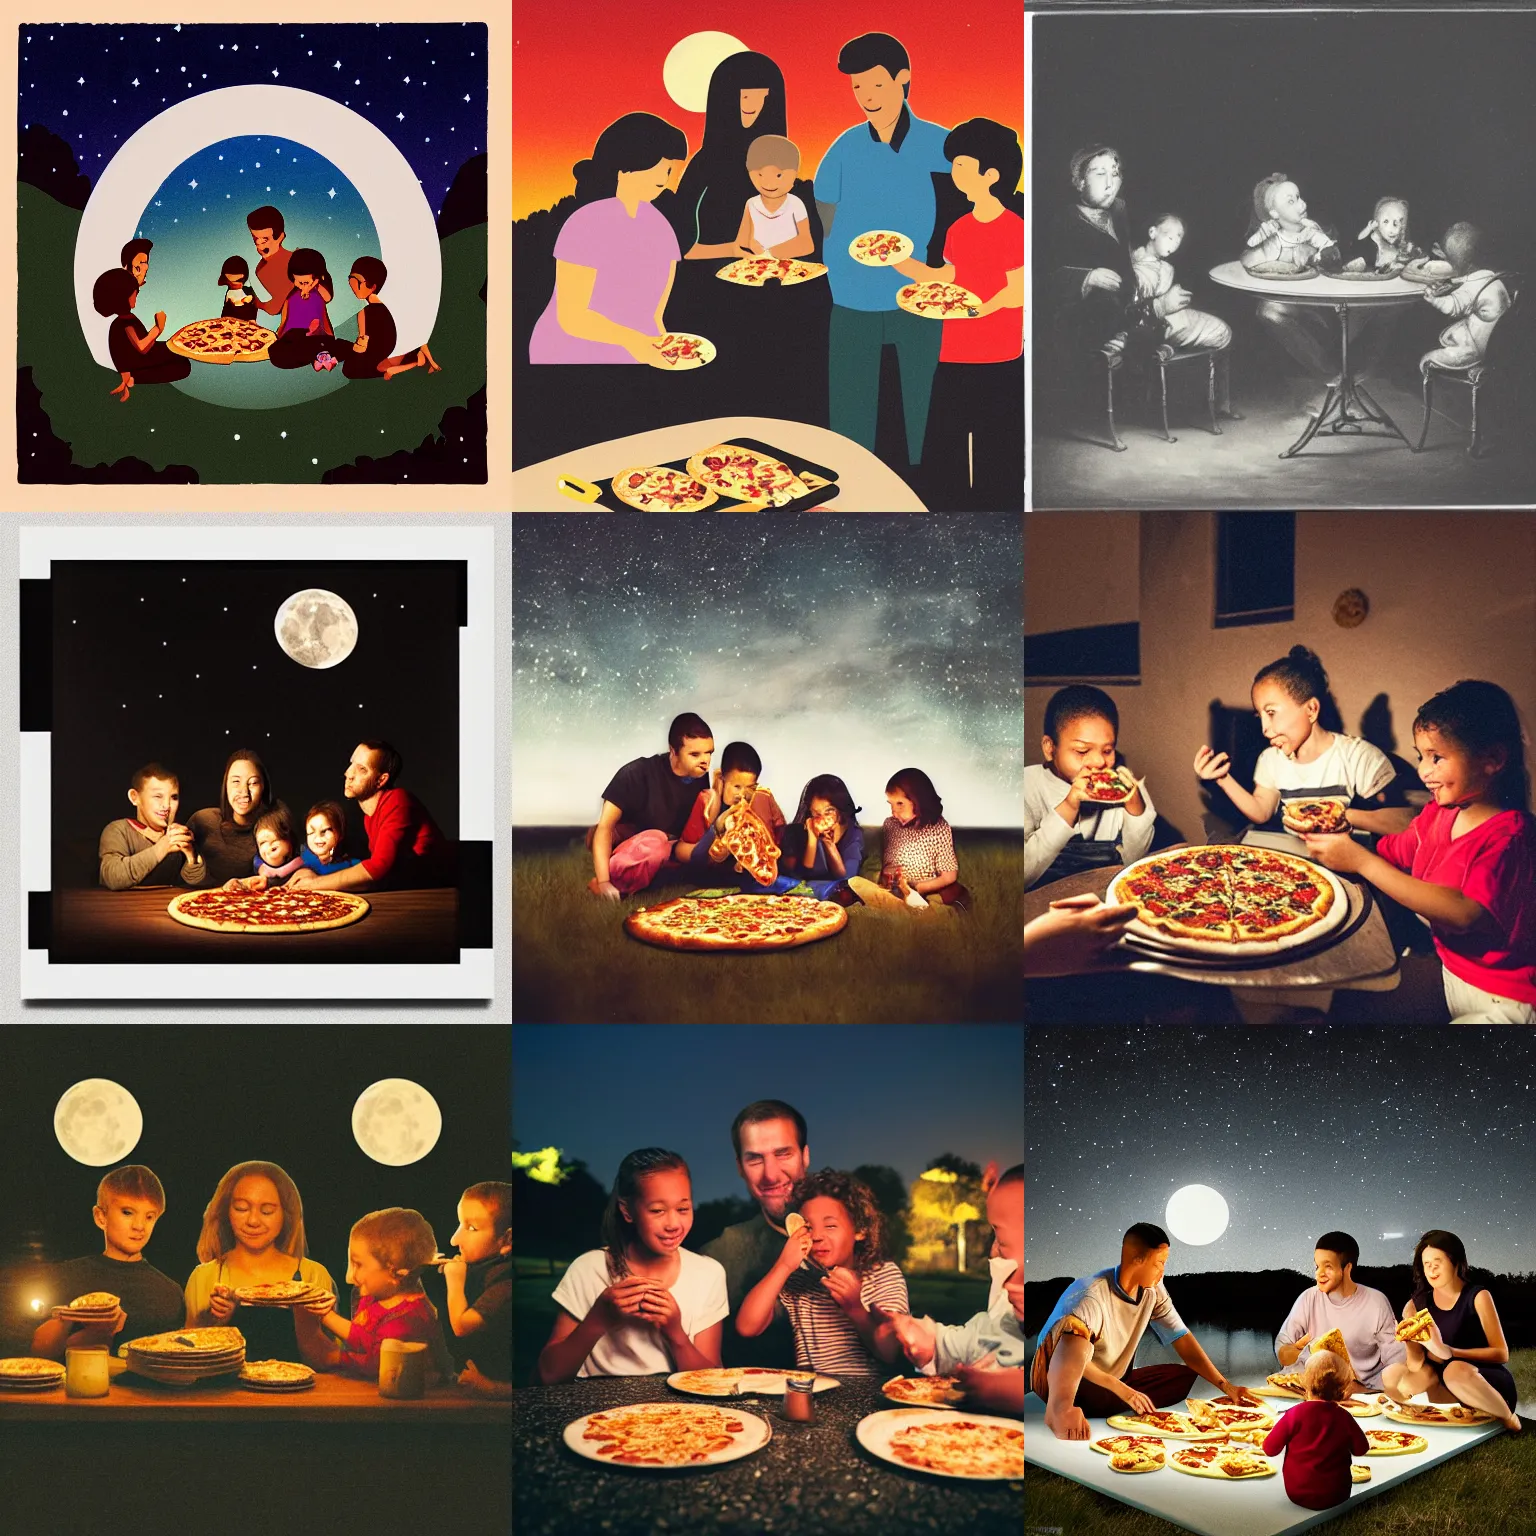 Prompt: “photograph of a family of 6 eating pizza on a moonlit night”